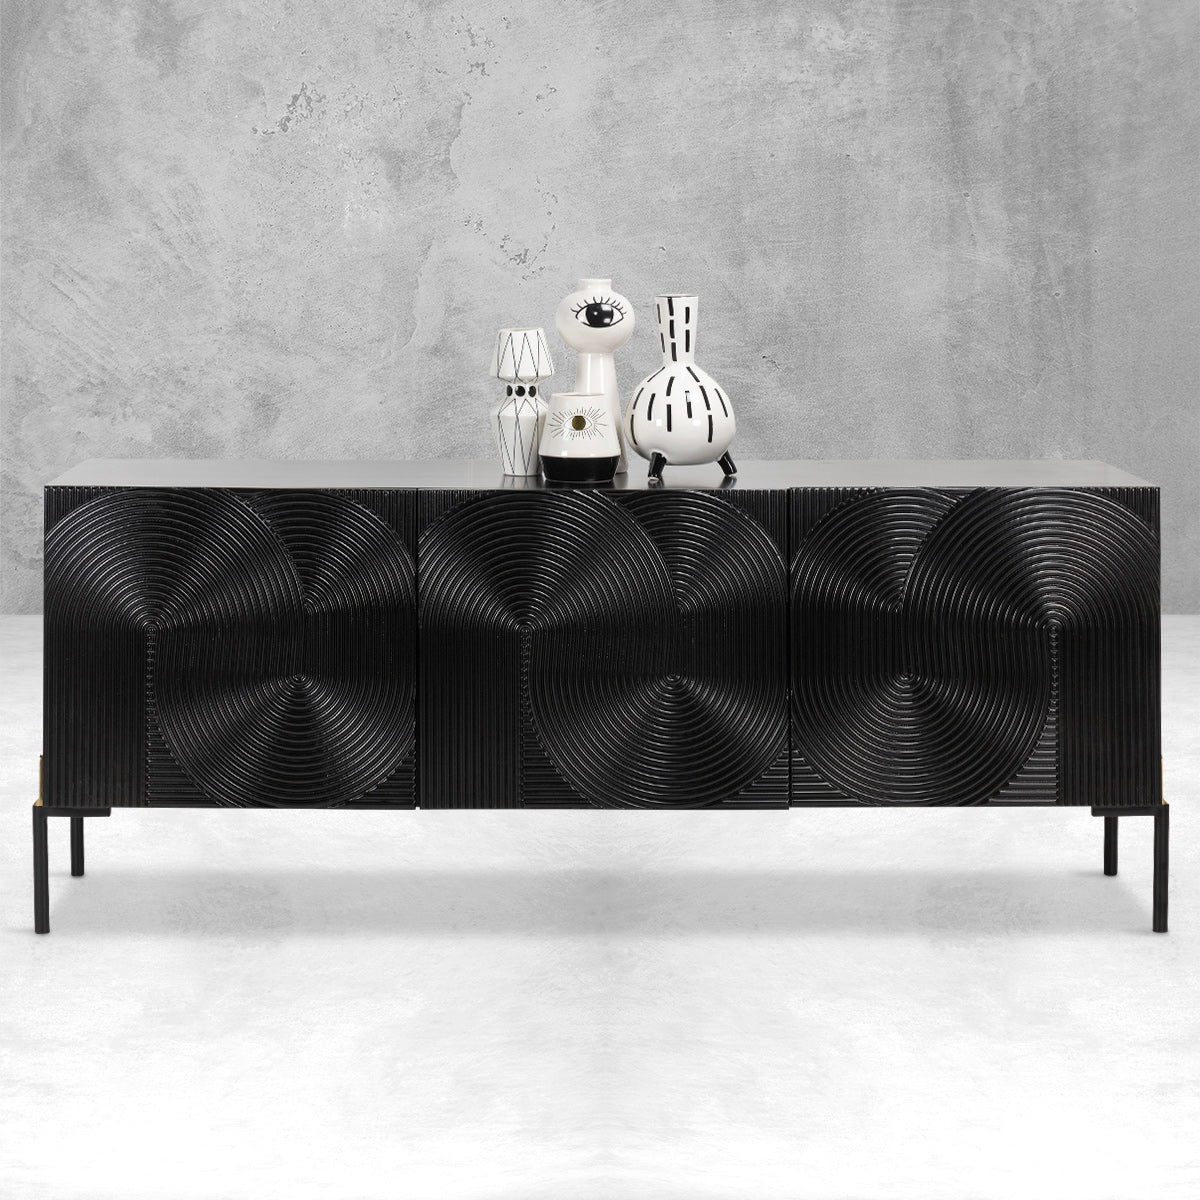 8 Track 3 Door Credenza with Matte Black and Brass Post Legs